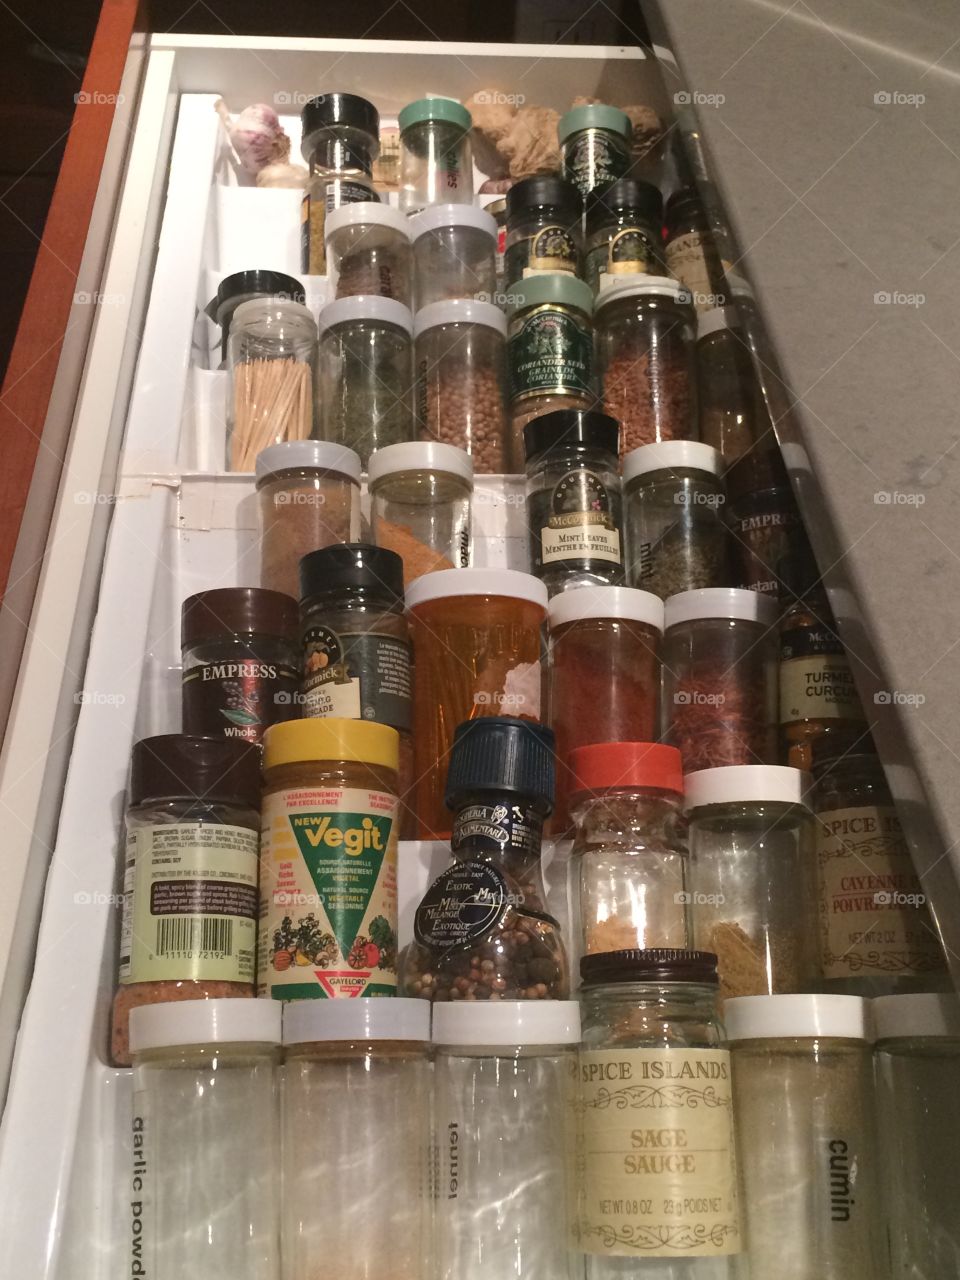 This pic is here to spice up your day with this drawer of epicures, seasonings and spices 